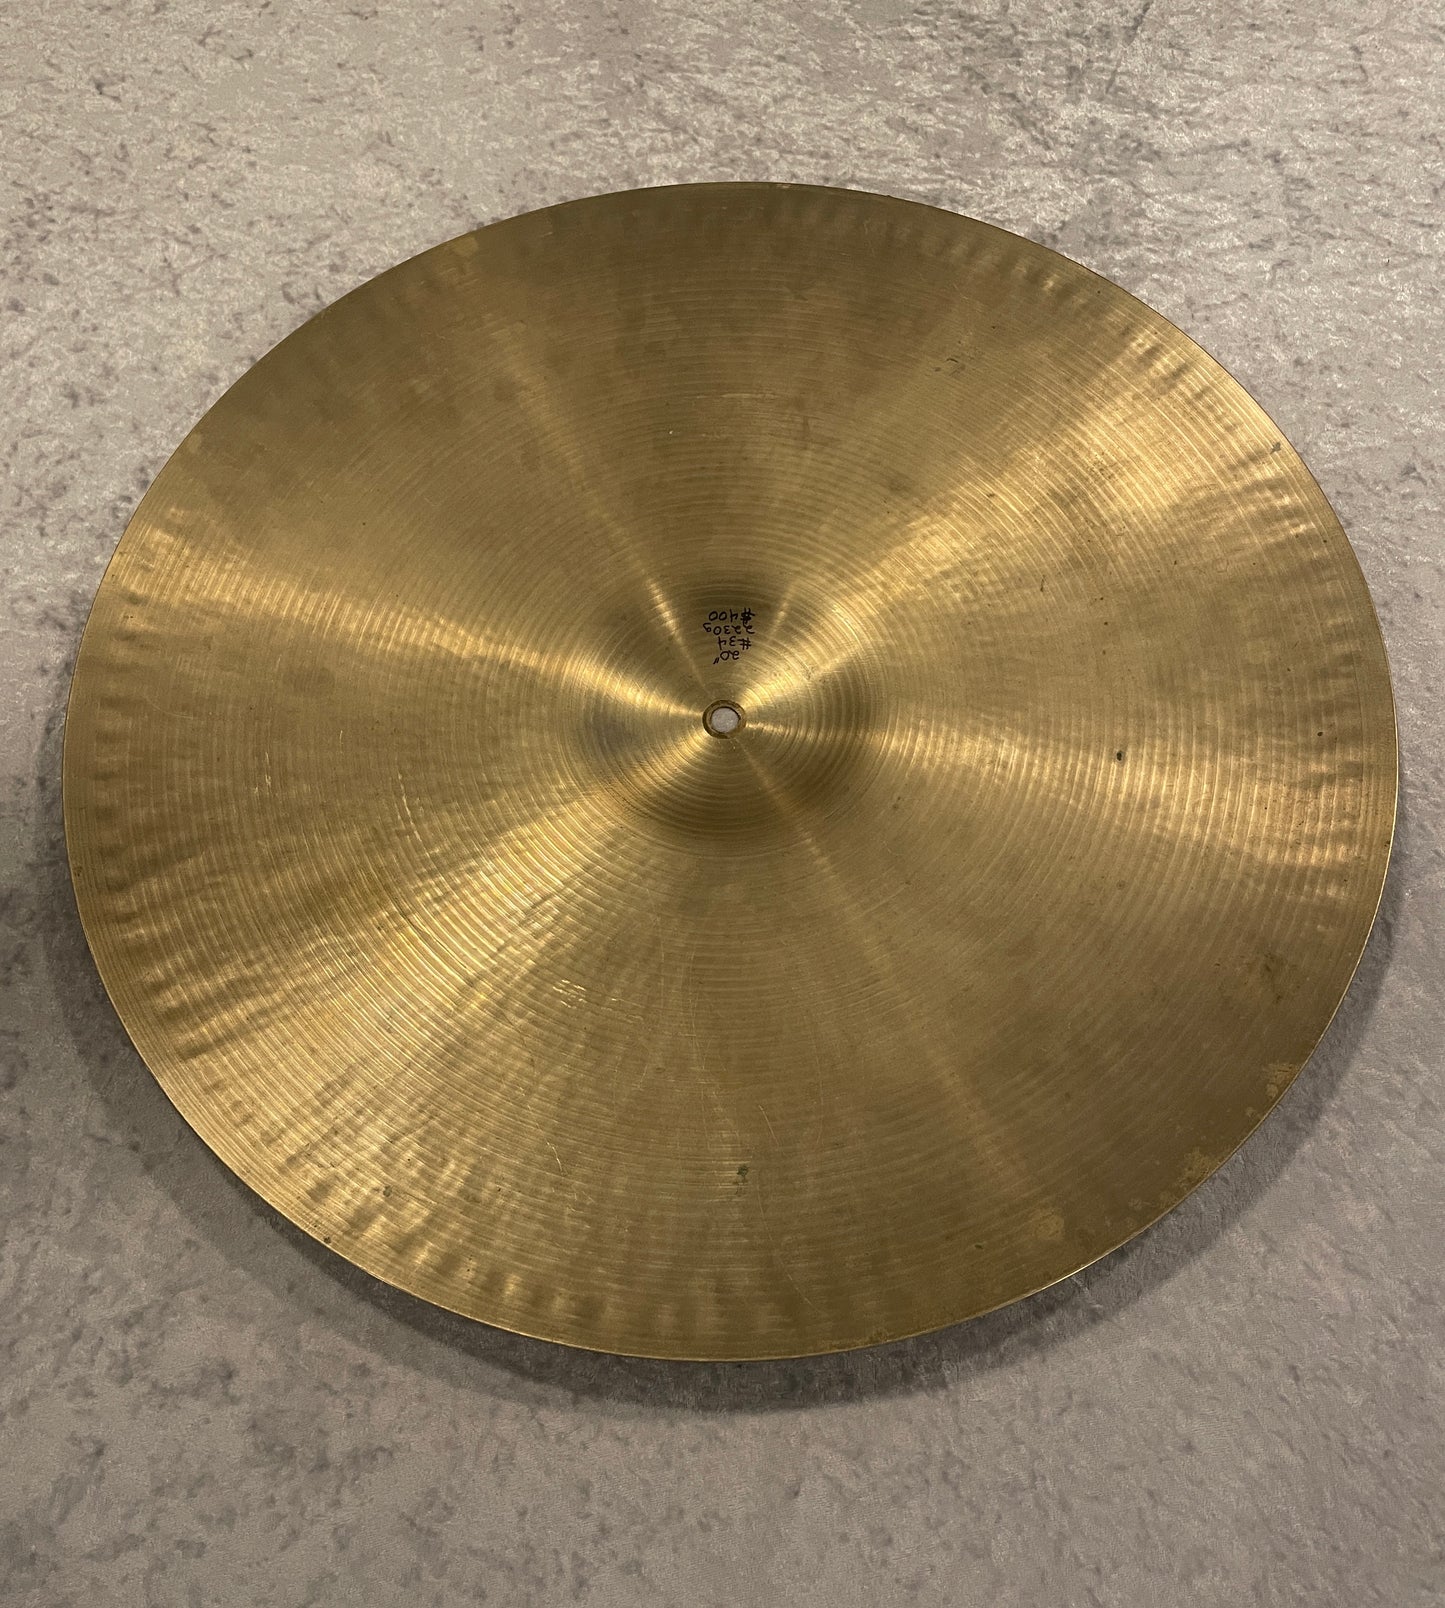 20" Paiste Pre-Serial Number Formula 602 Ride Cymbal 2230g #34